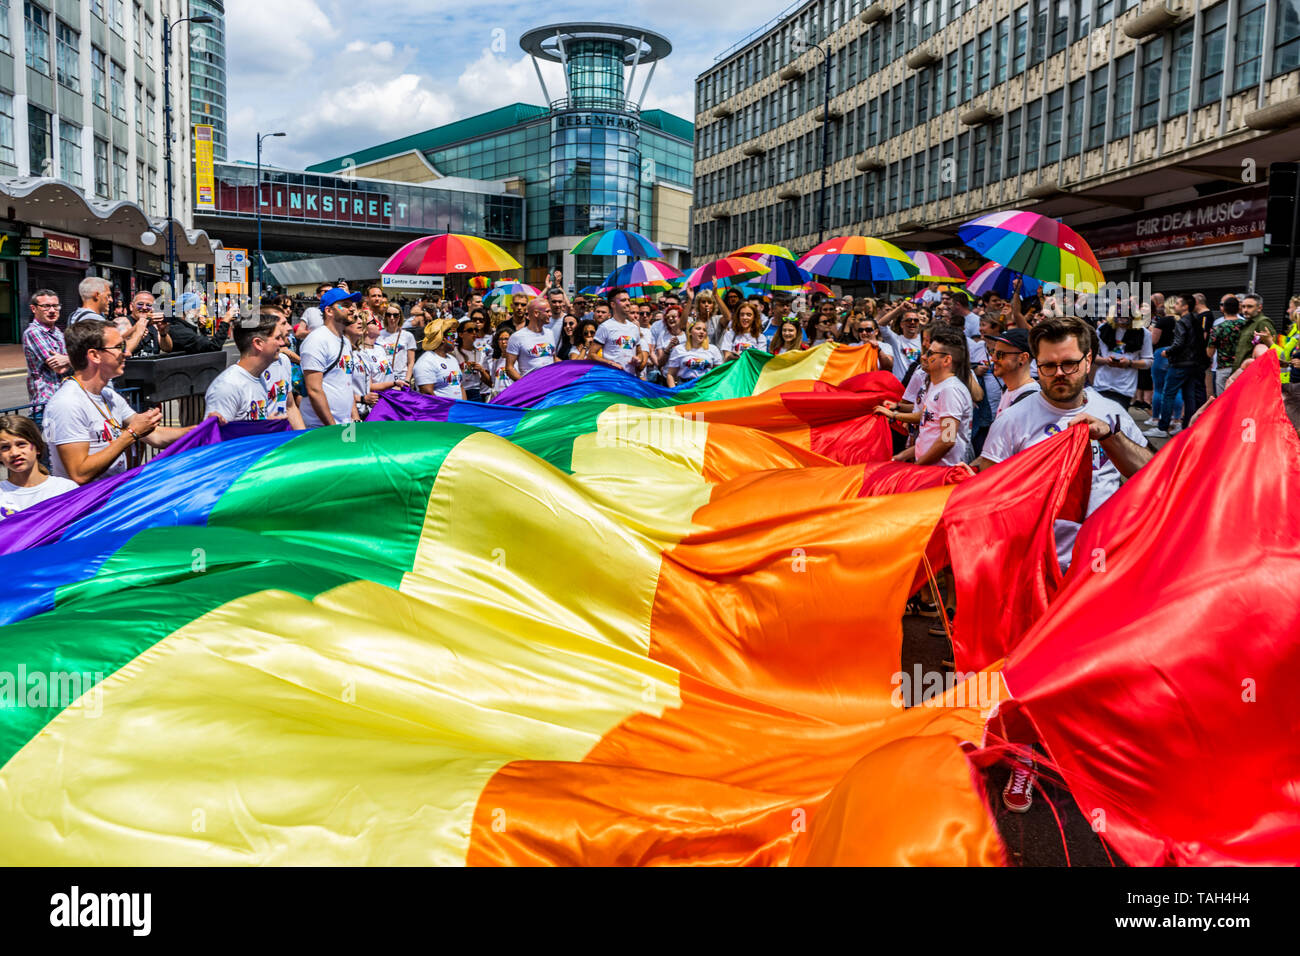 Members of the LGBTQ community are seen holding a rainbow flag and umbrellas during the Birmingham Pride parade. Birmingham Pride this year is endorsing the controversial of No Outsiders educational programme, organisers are hopeful that this year’s event will be the biggest in its 22 year history, with the largest Muslim contingent ever seen at Birmingham Pride, an annual festival for the LGBTQ community usually takes place over the Spring Bank Holiday. The event begins with a parade from Victoria Square in the city centre to the Gay Village in Hurst Street. Stock Photo